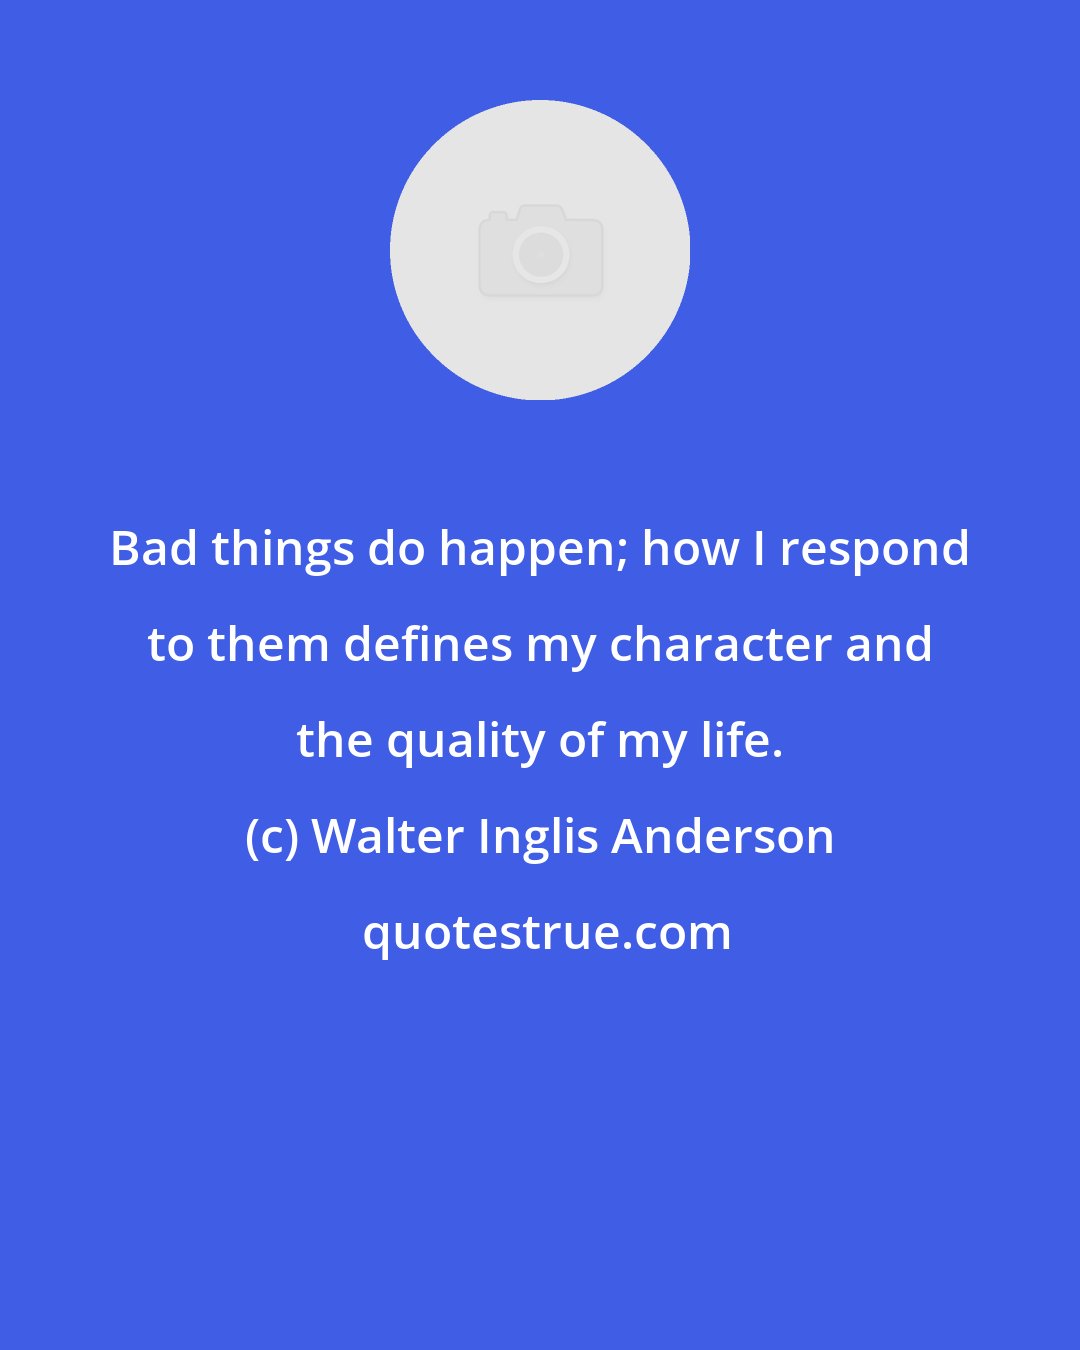 Walter Inglis Anderson: Bad things do happen; how I respond to them defines my character and the quality of my life.